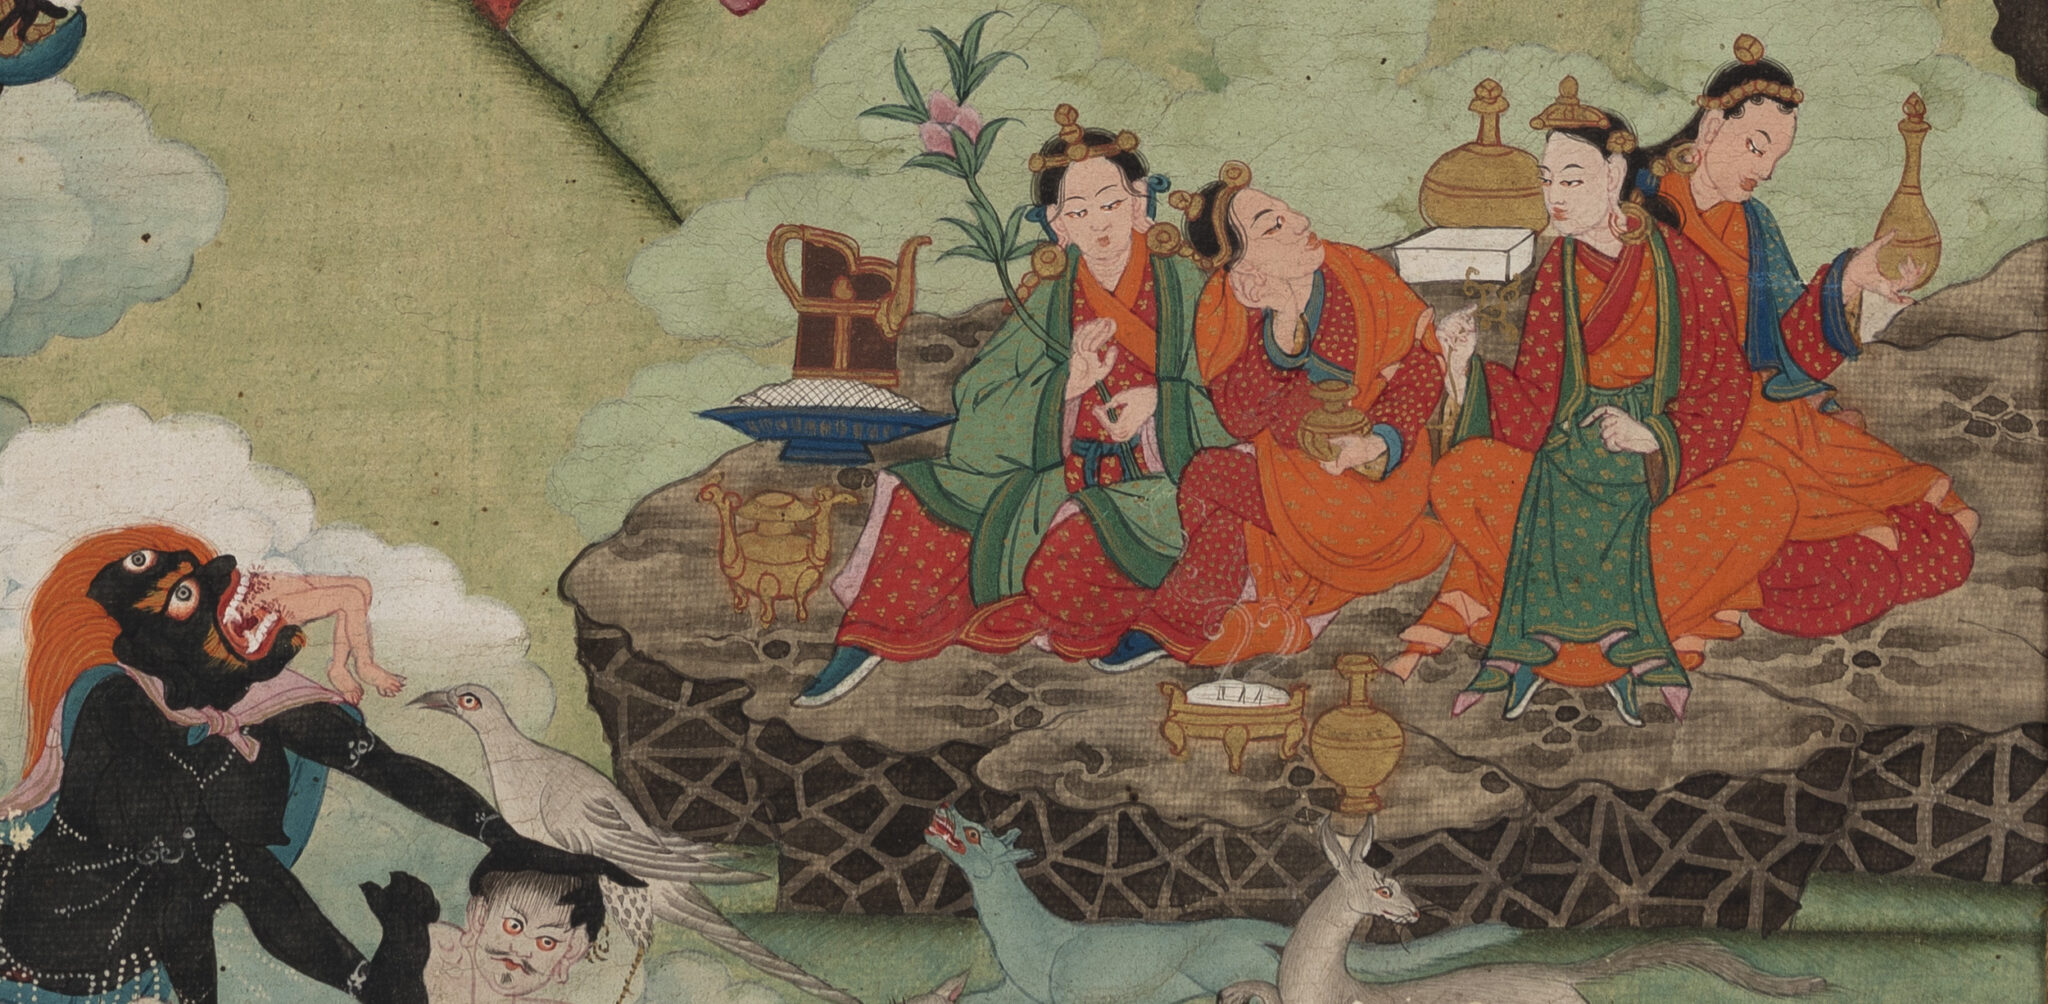 Four ladies wearing resplendent robes recline amongst collection of pitchers and other metal vessels